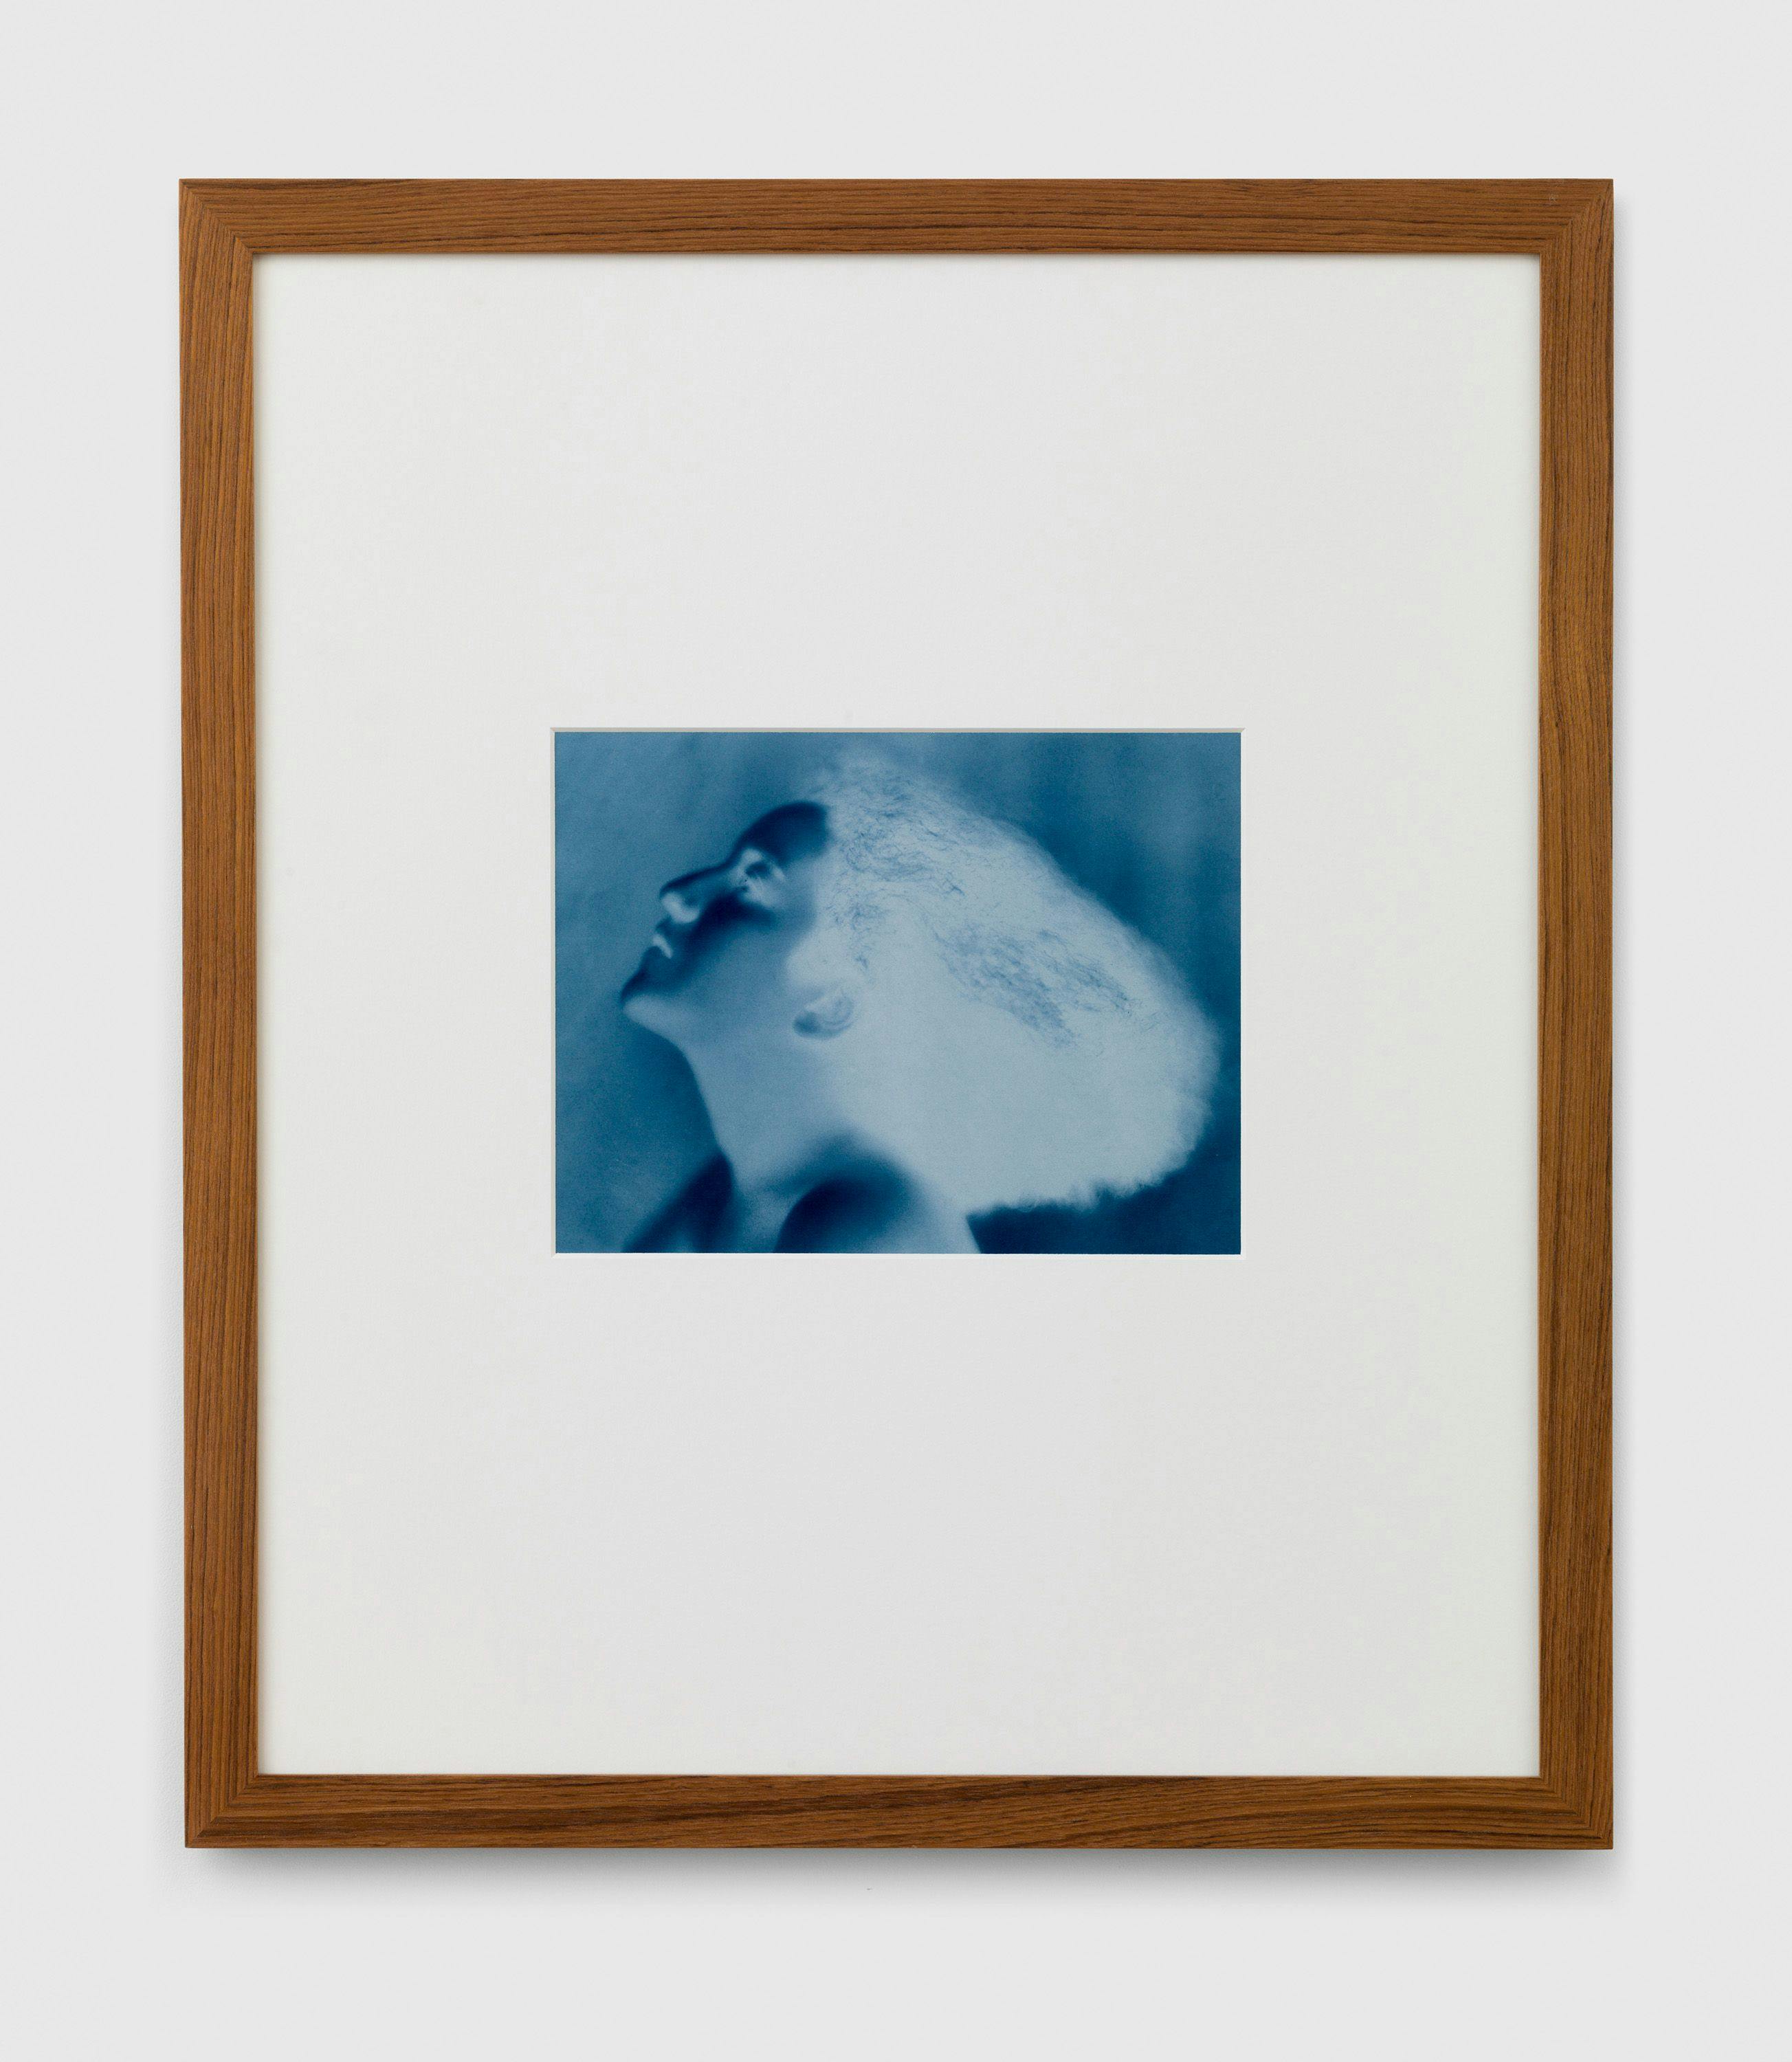 A photograph by Thomas Ruff, titled neg◊nus_01, dated 2014.